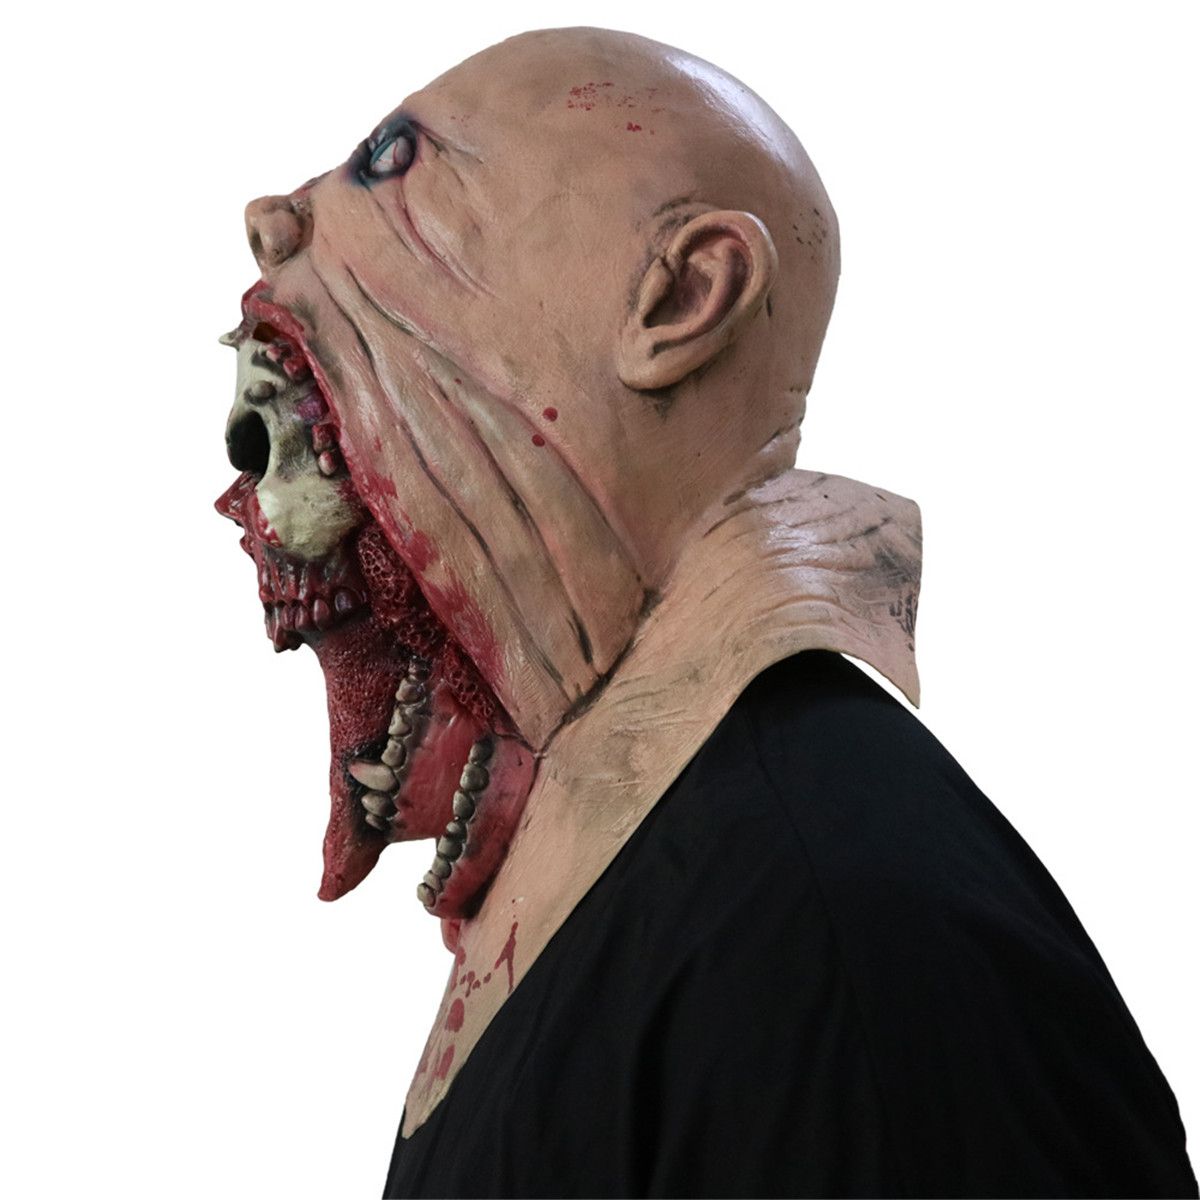 Halloween-Adult-Sloth-Deluxe-Latex-Mask-Scary-Costume-Fancy-Mask-Zombie-Mask-Decoration-Props-1730882